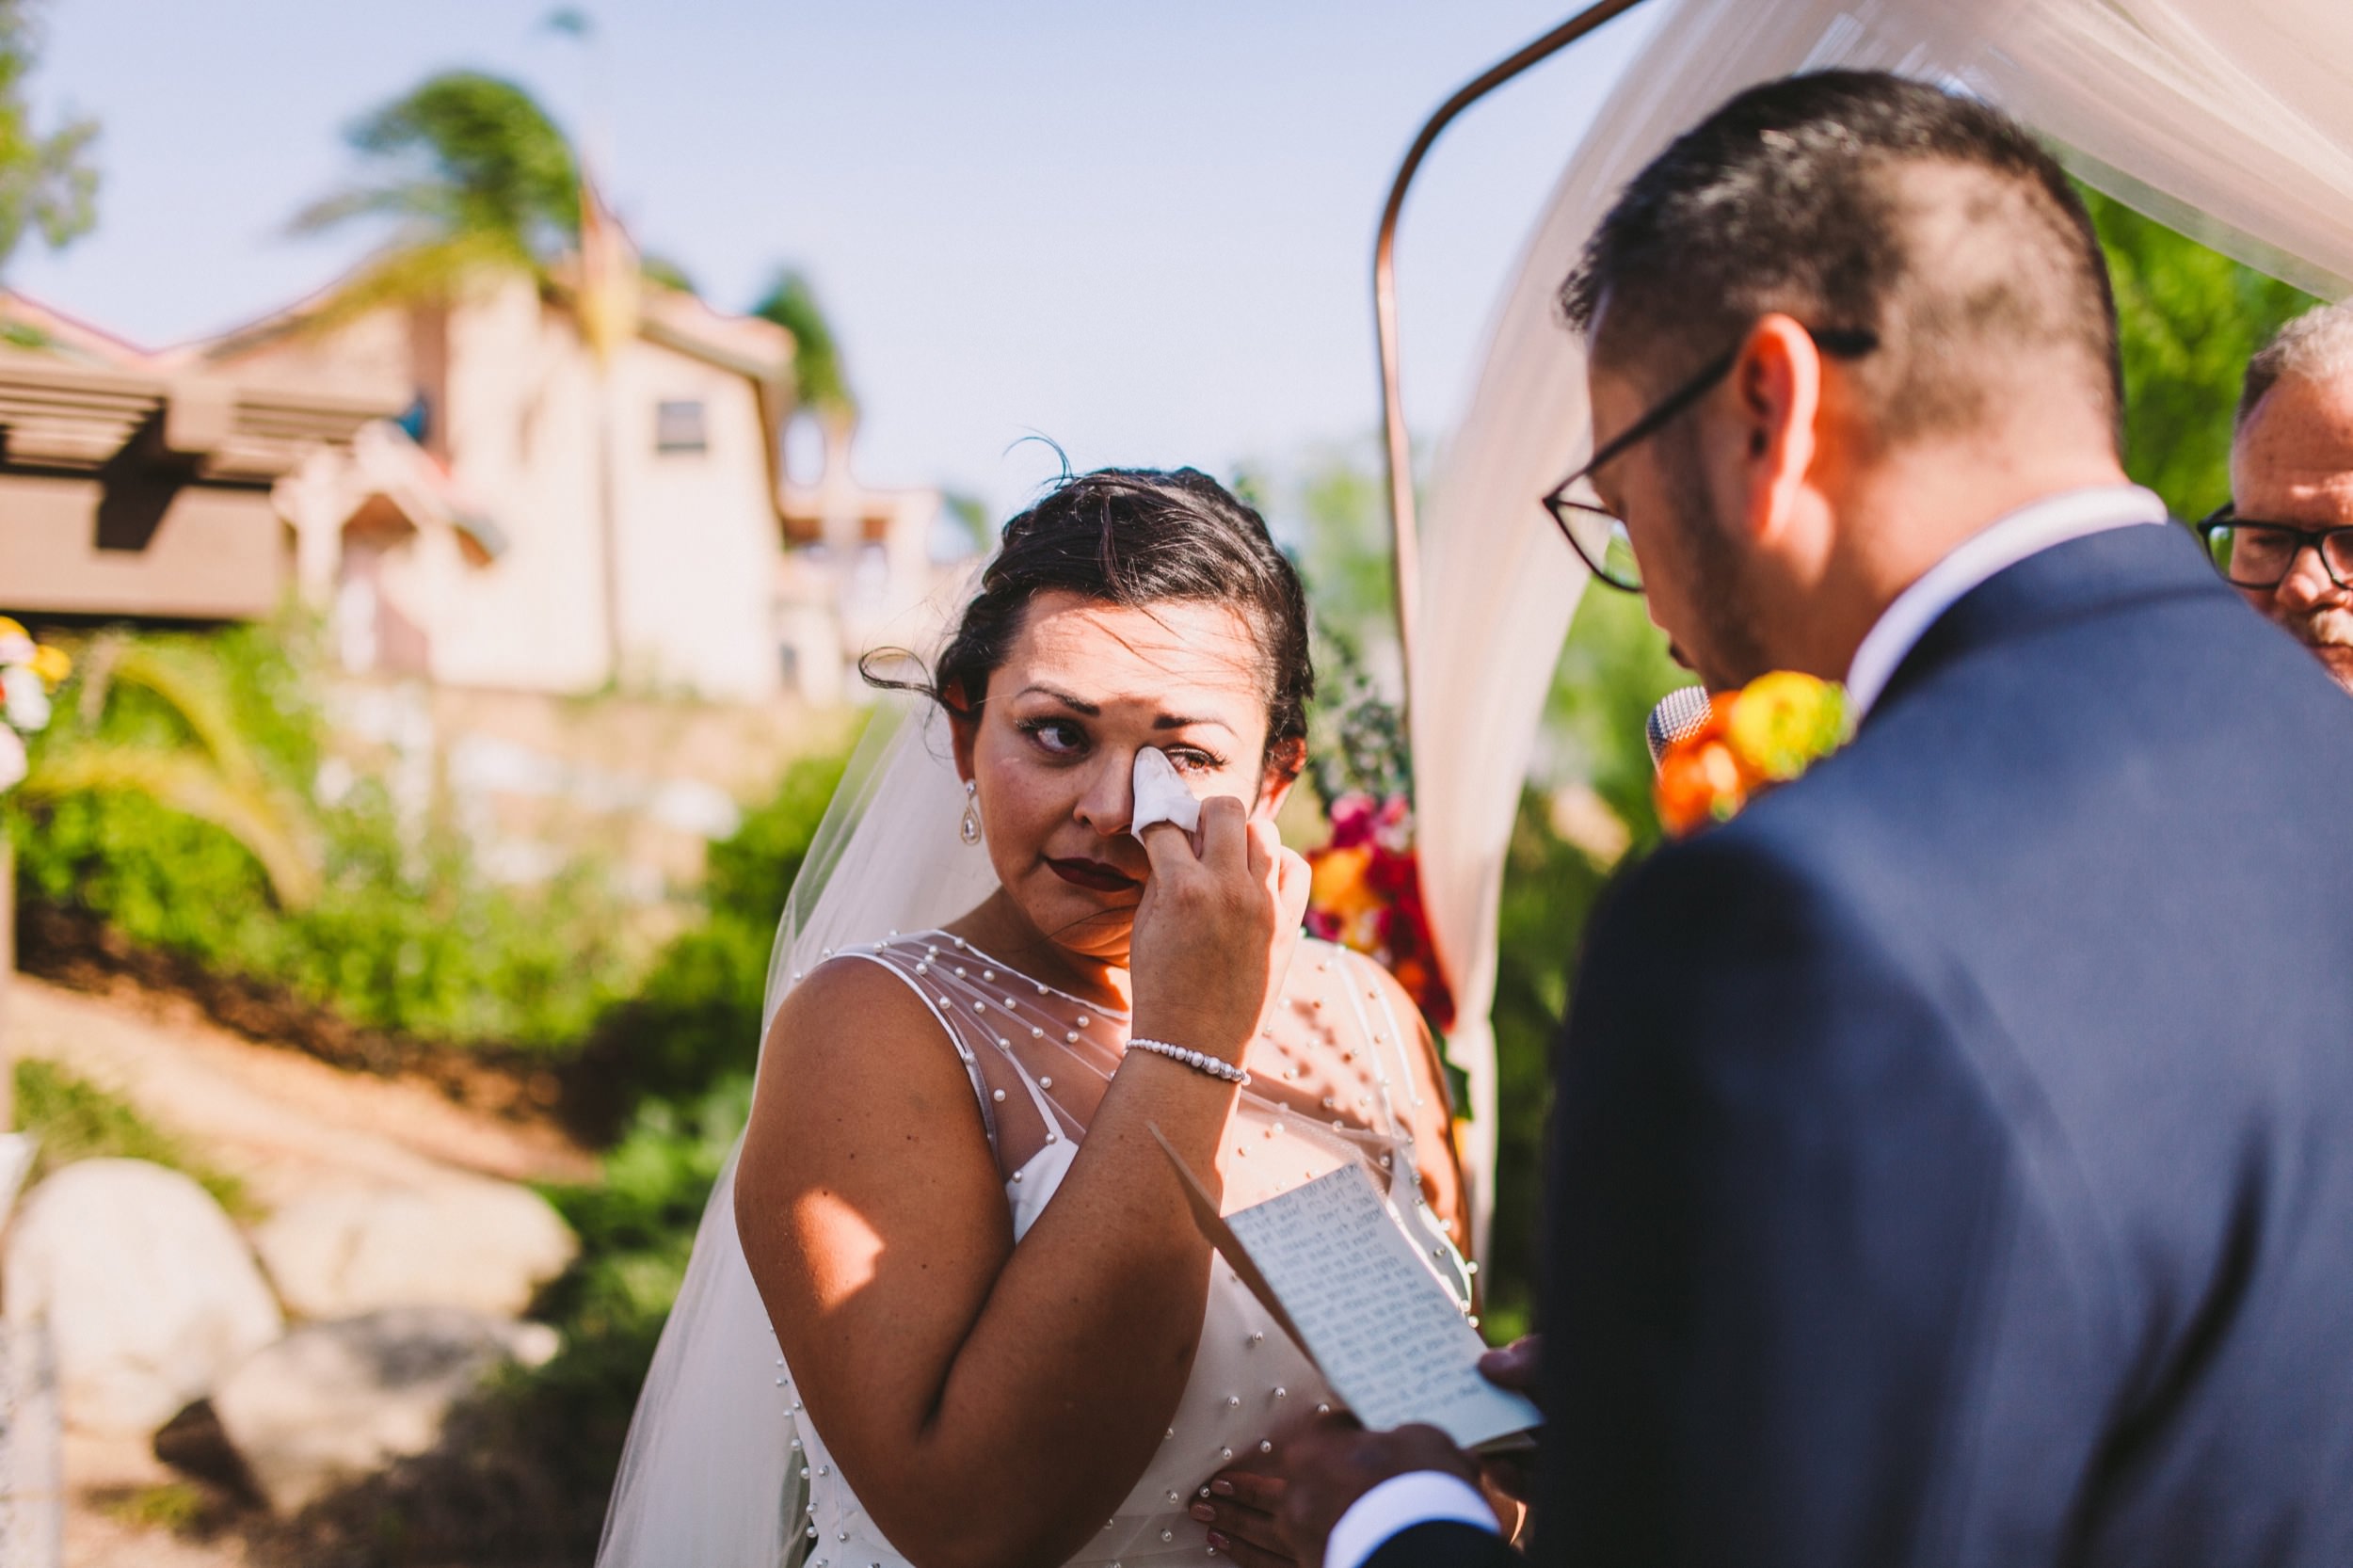 Intimate, Relaxed & Colorful Wedding Photography in Temecula-164.jpg